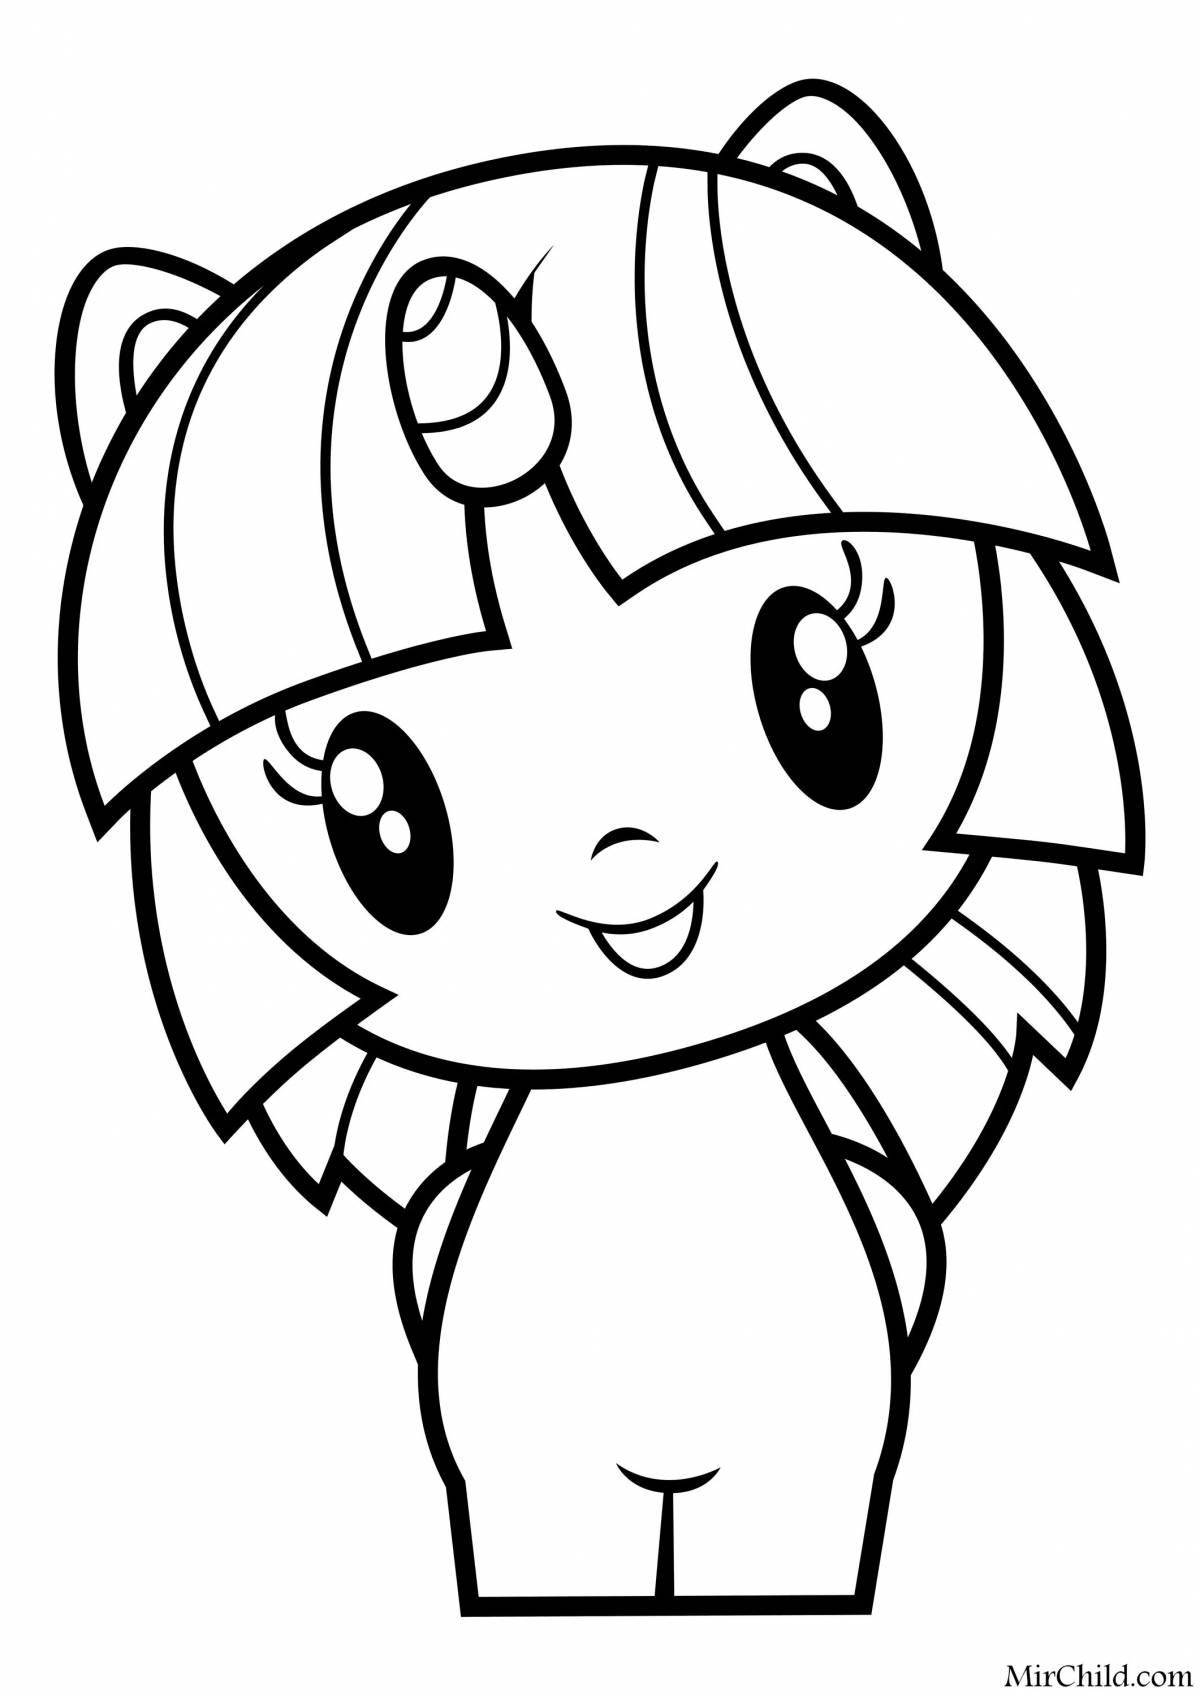 Playful pony coloring page for kids